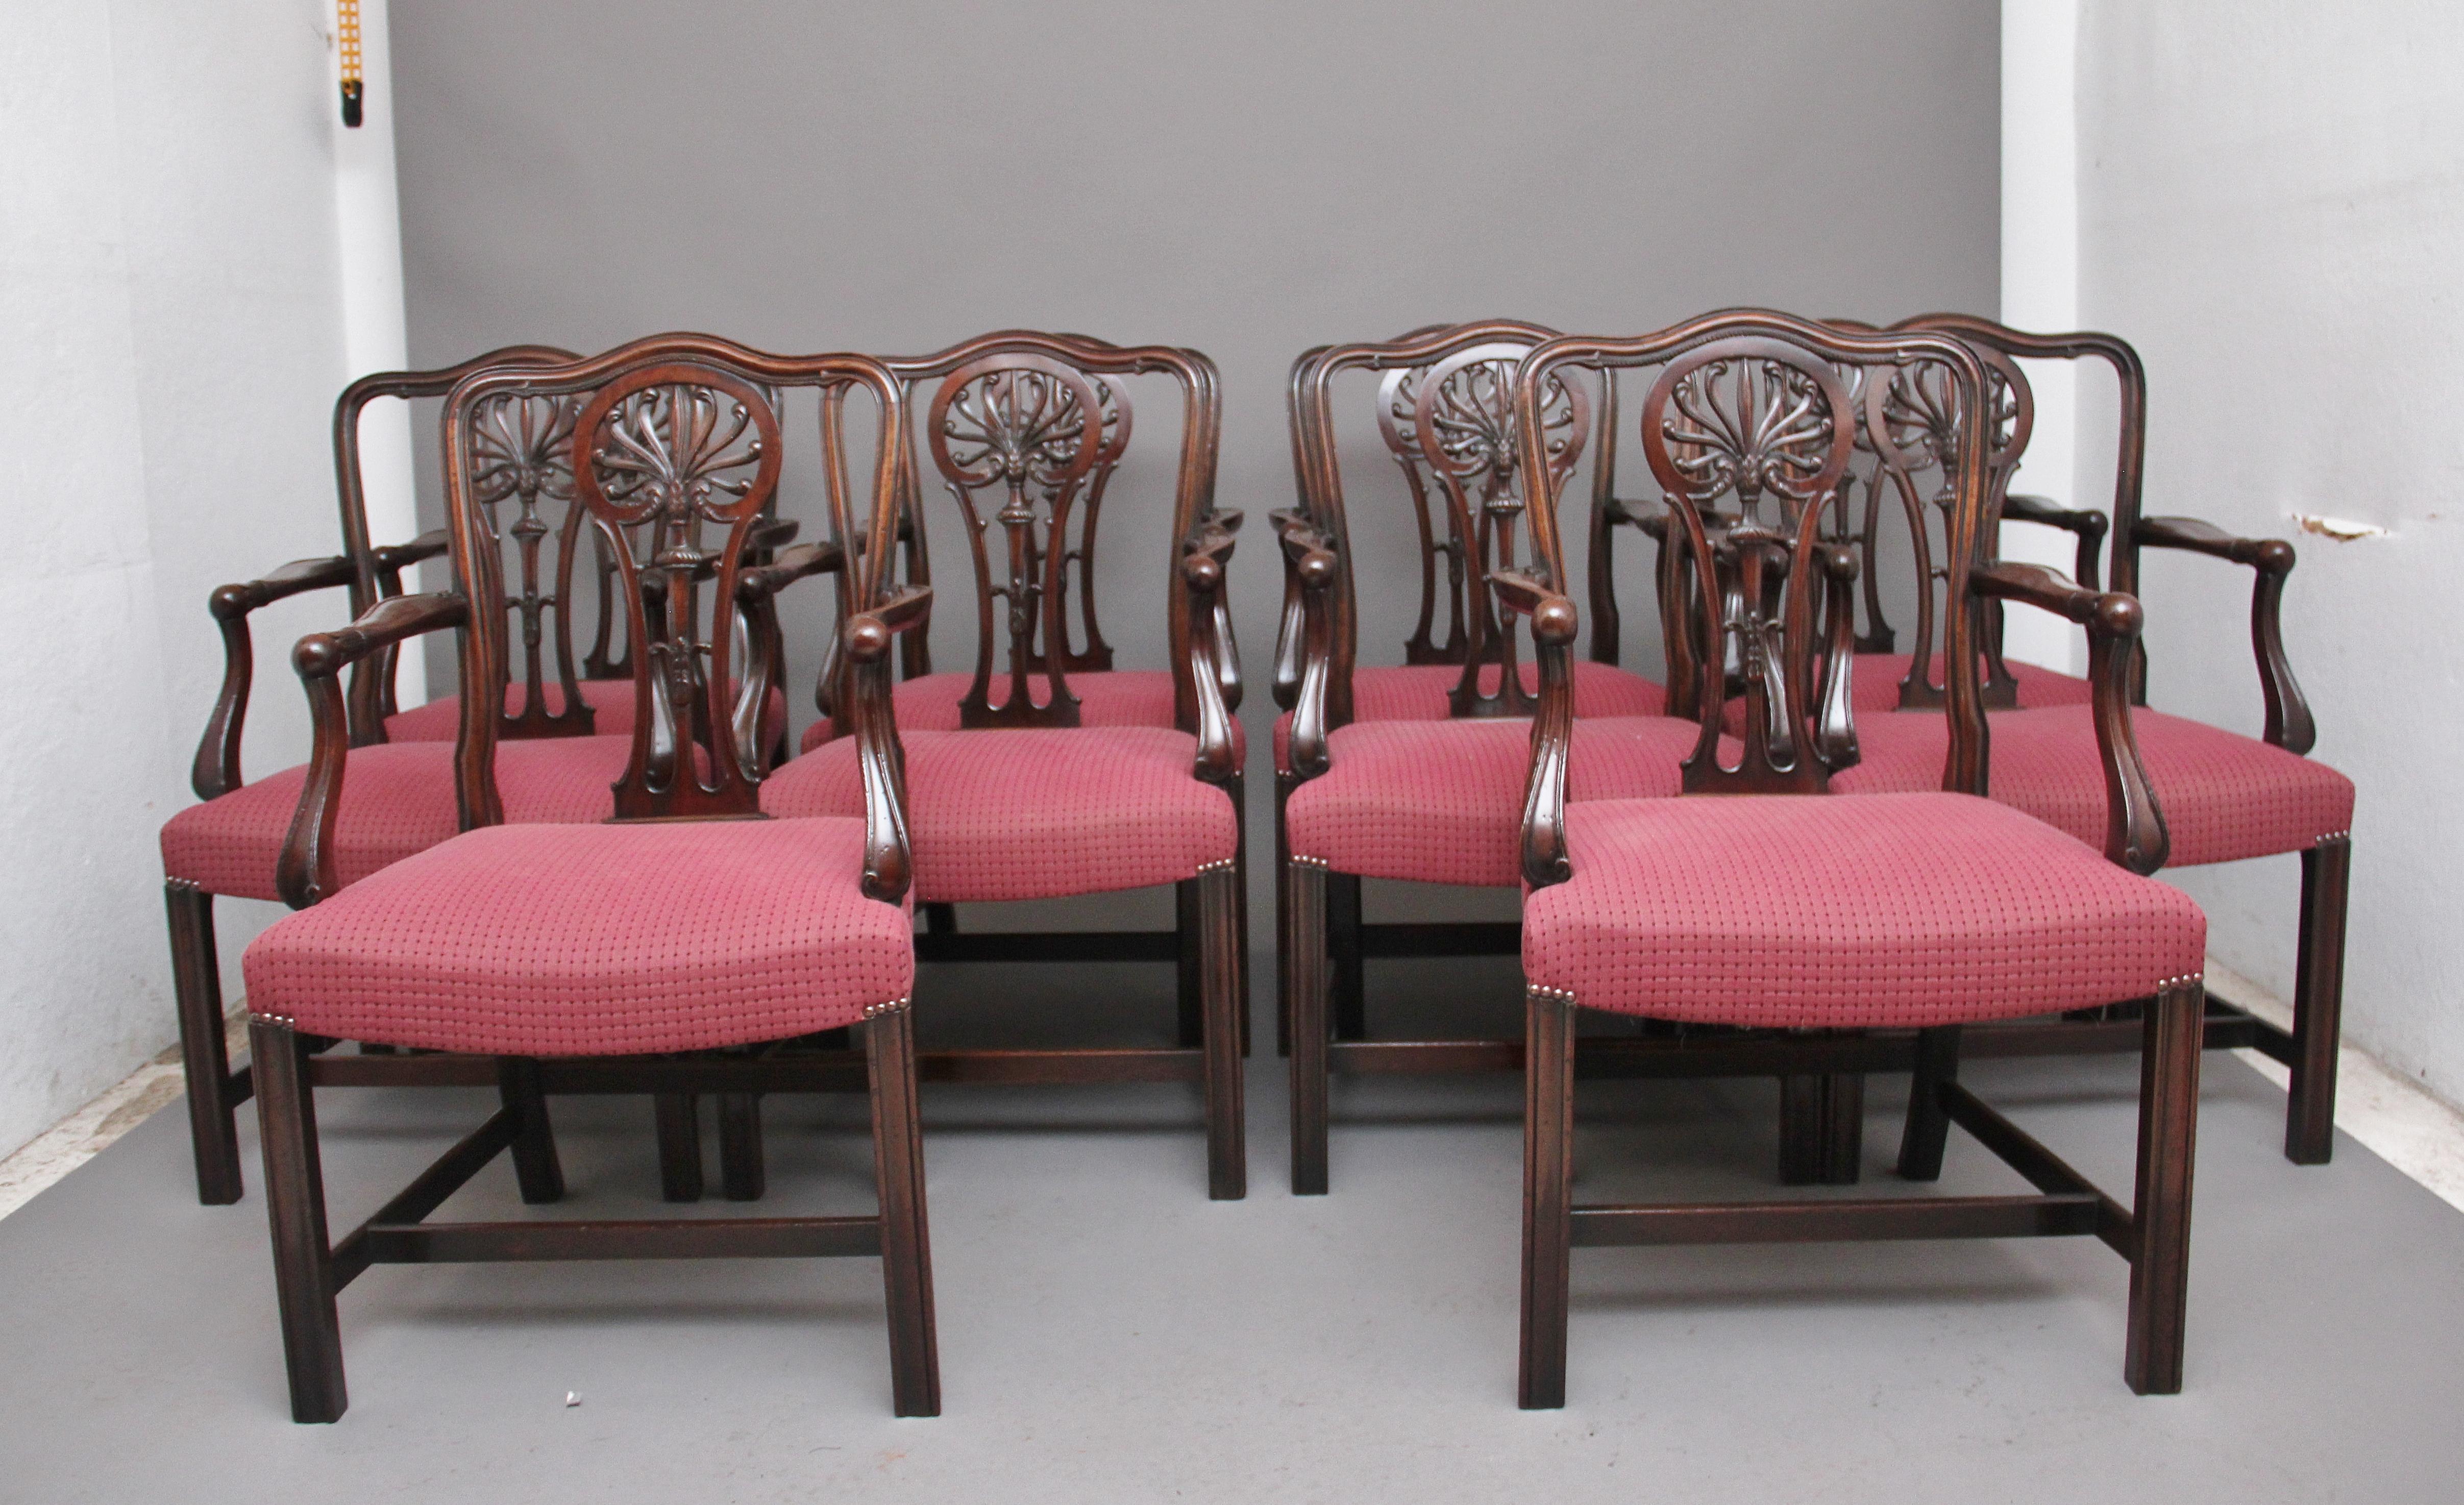 A set of ten early 20th century mahogany armchairs by Alfred Allen Furnishings of Birmingham, with a decorative carved & pierced splat in the back, the slender curved supports with carved floral decoration on the front of the arms, with a red stuff